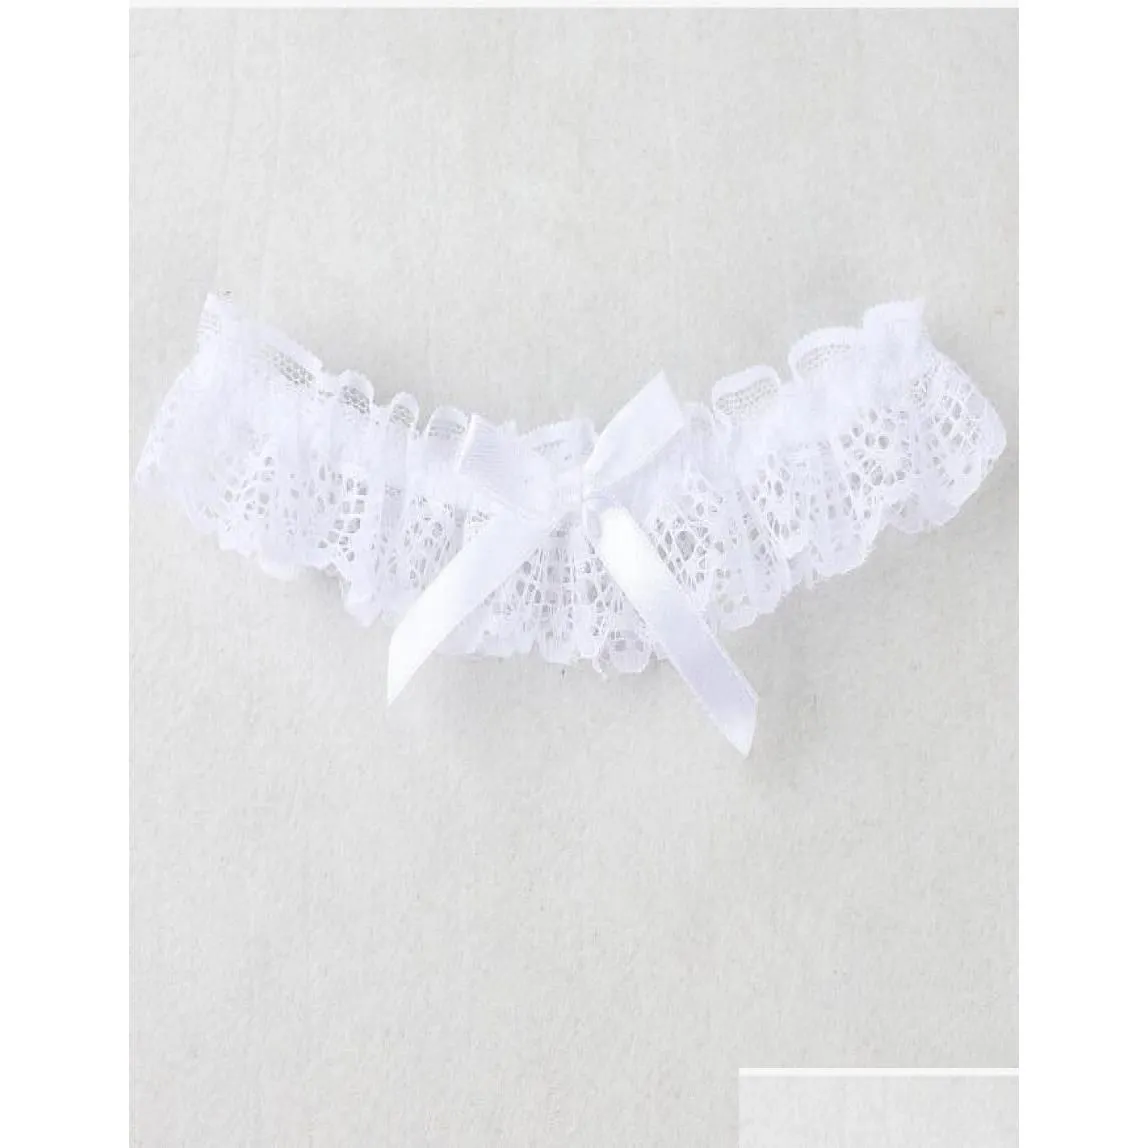 The Bridal Garters New At Acced Sell White Lace Bowknot Flowers Leg Ring Shuoshuo65885377811 Accounts Drop Deliver